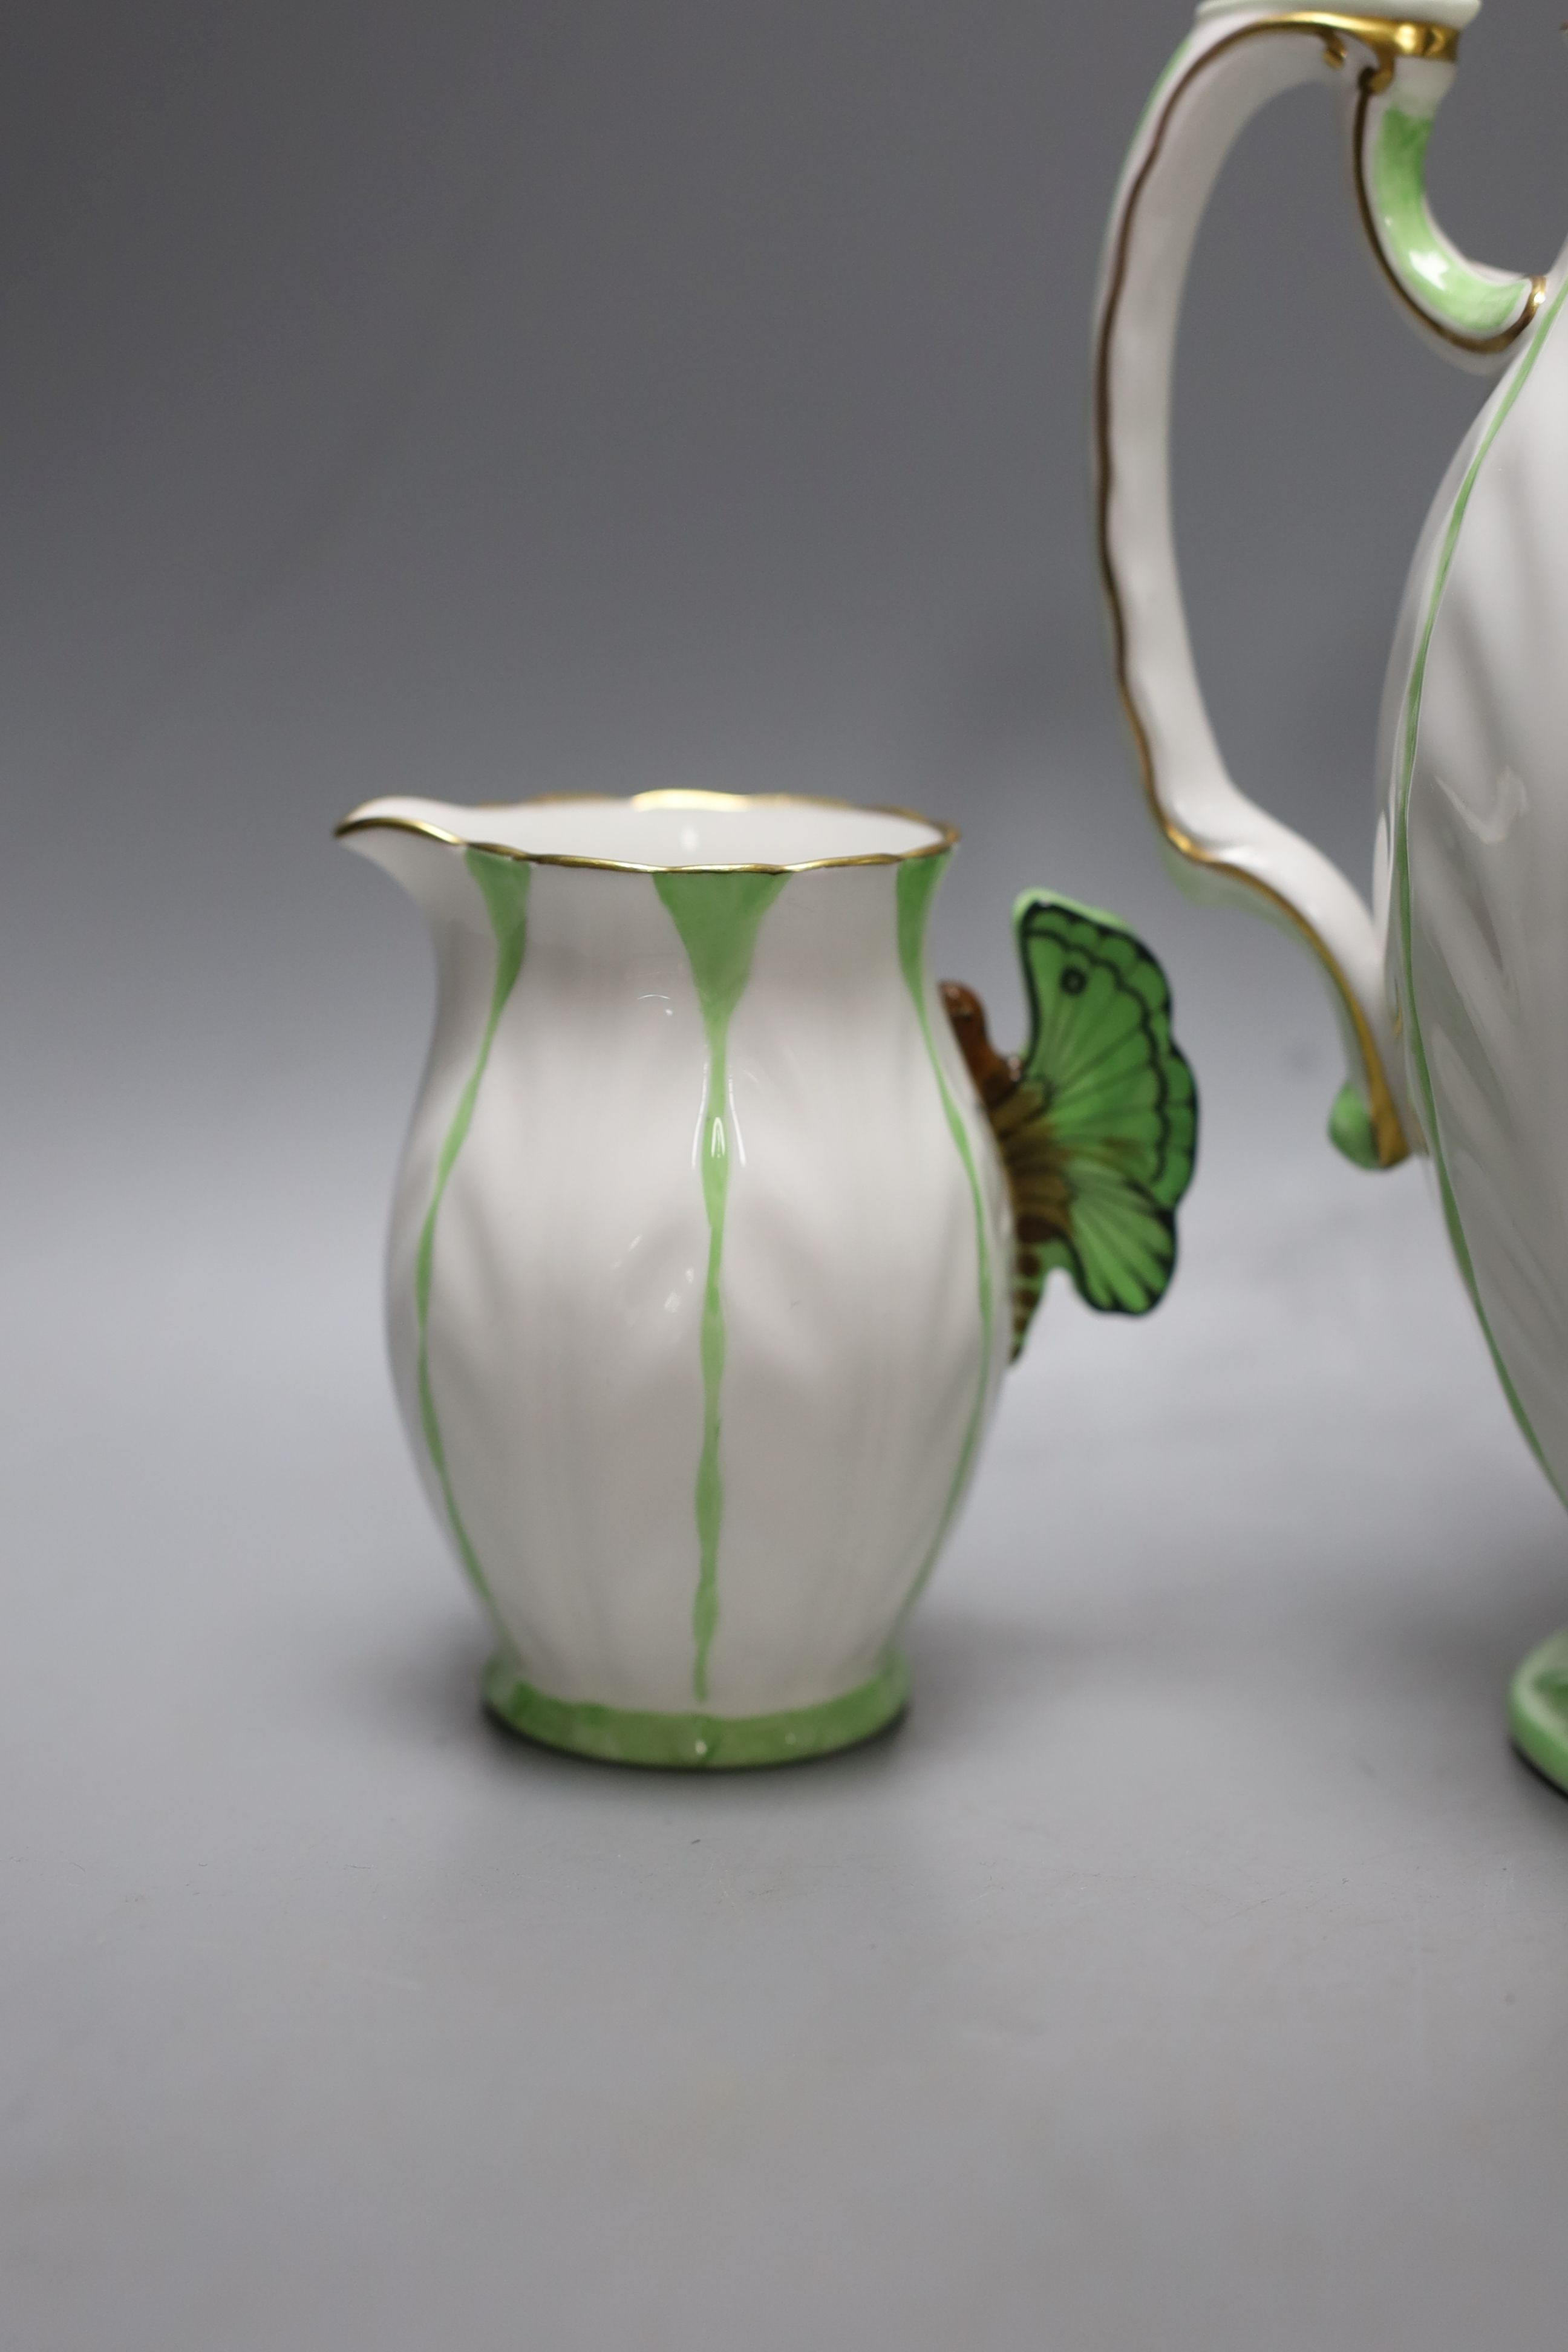 An Aynsley green and white butterfly handled part tea service